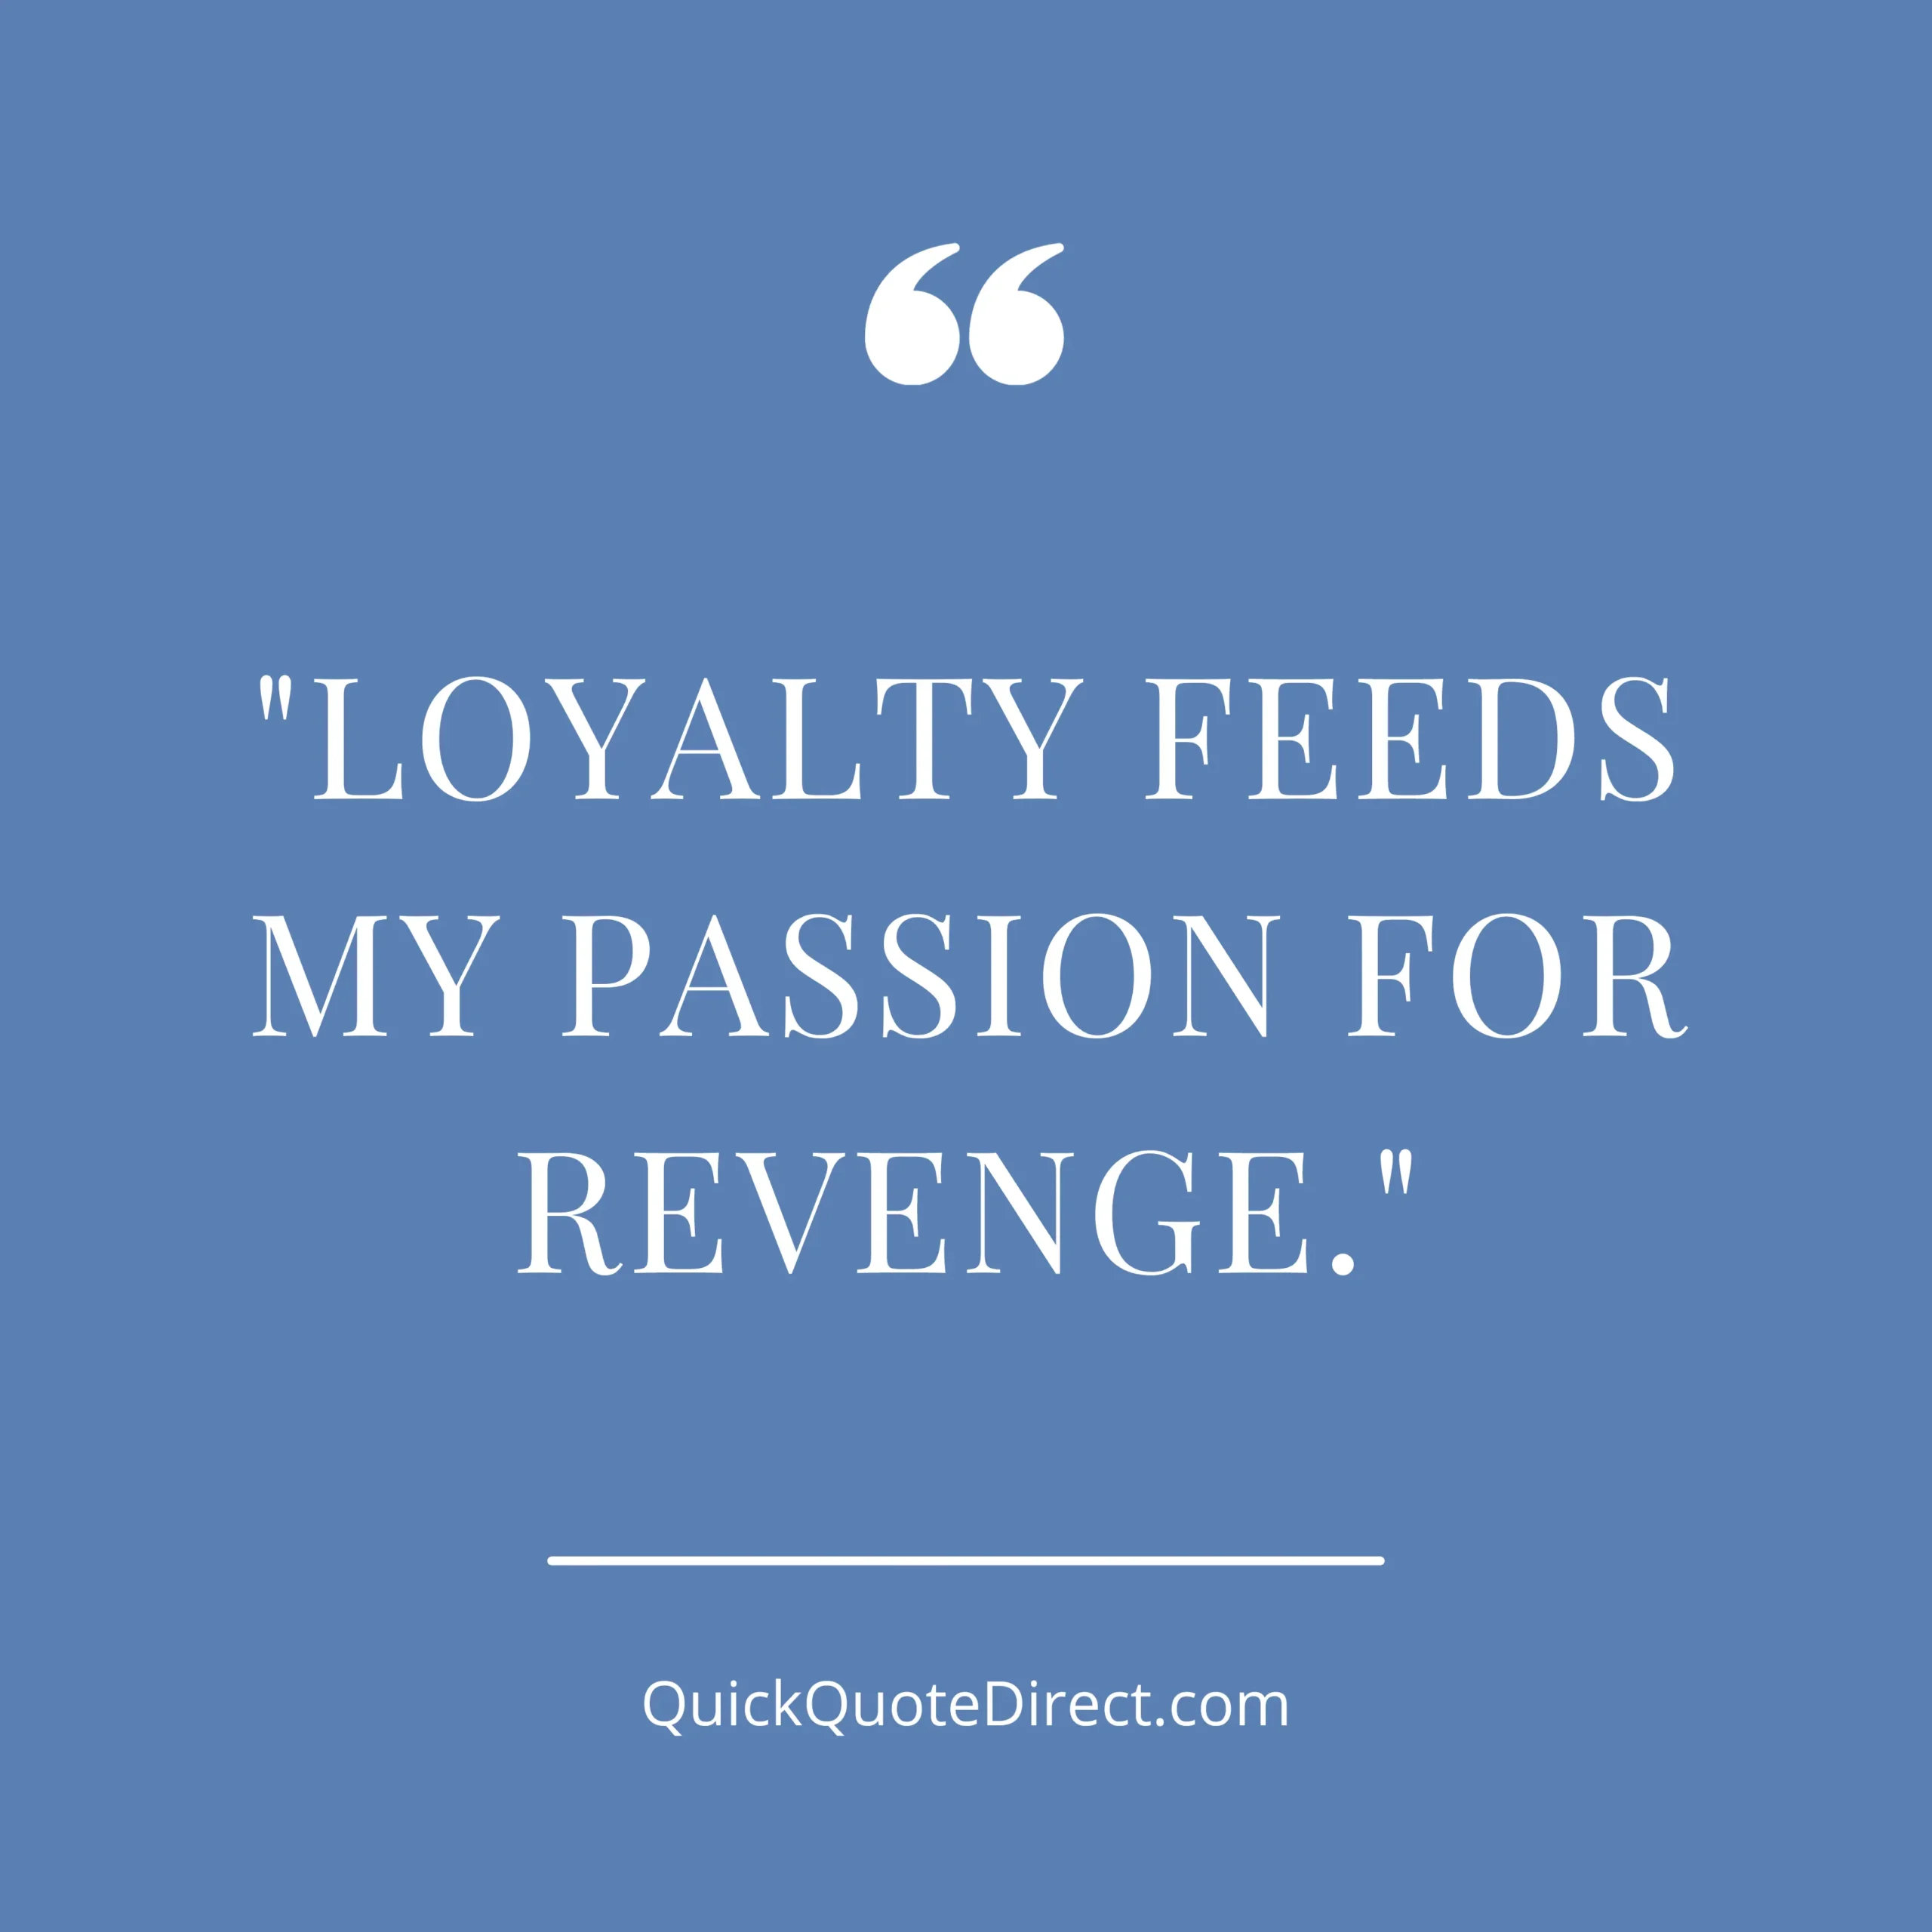 Famous Quotes About Revenge Loyalty Feeds My Passion